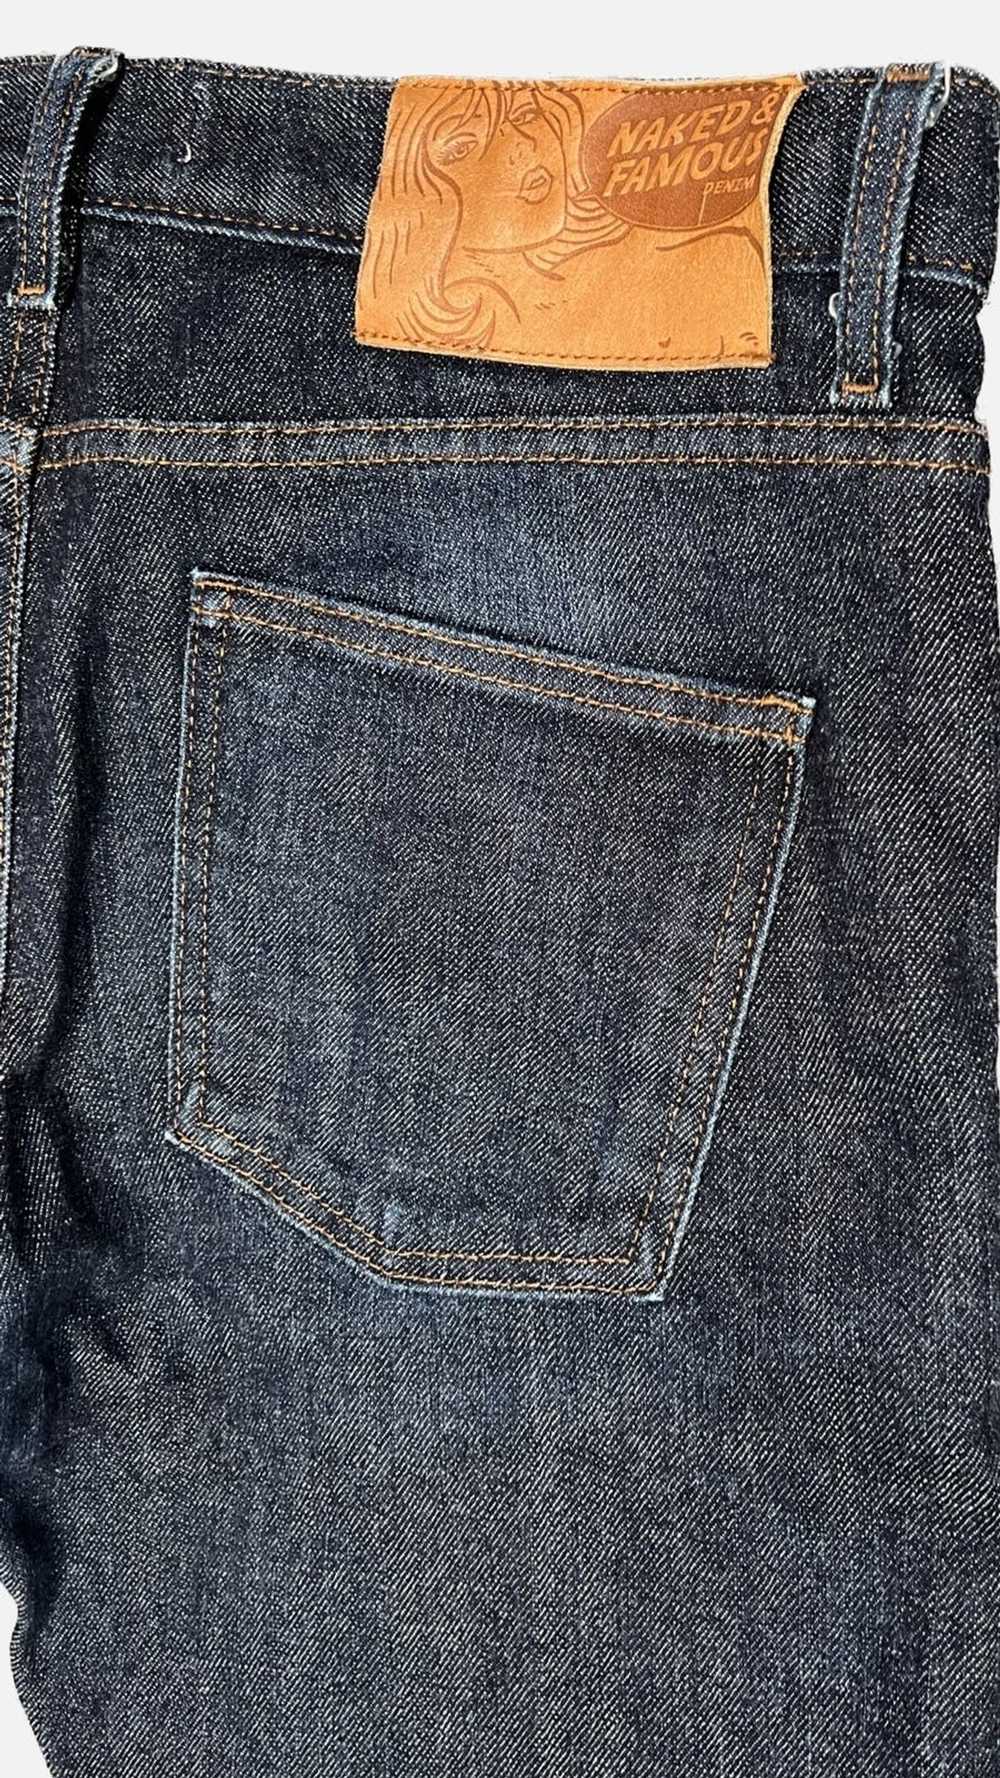 Naked & Famous Stretch Selvedge “Super Skinny Guy” - image 3